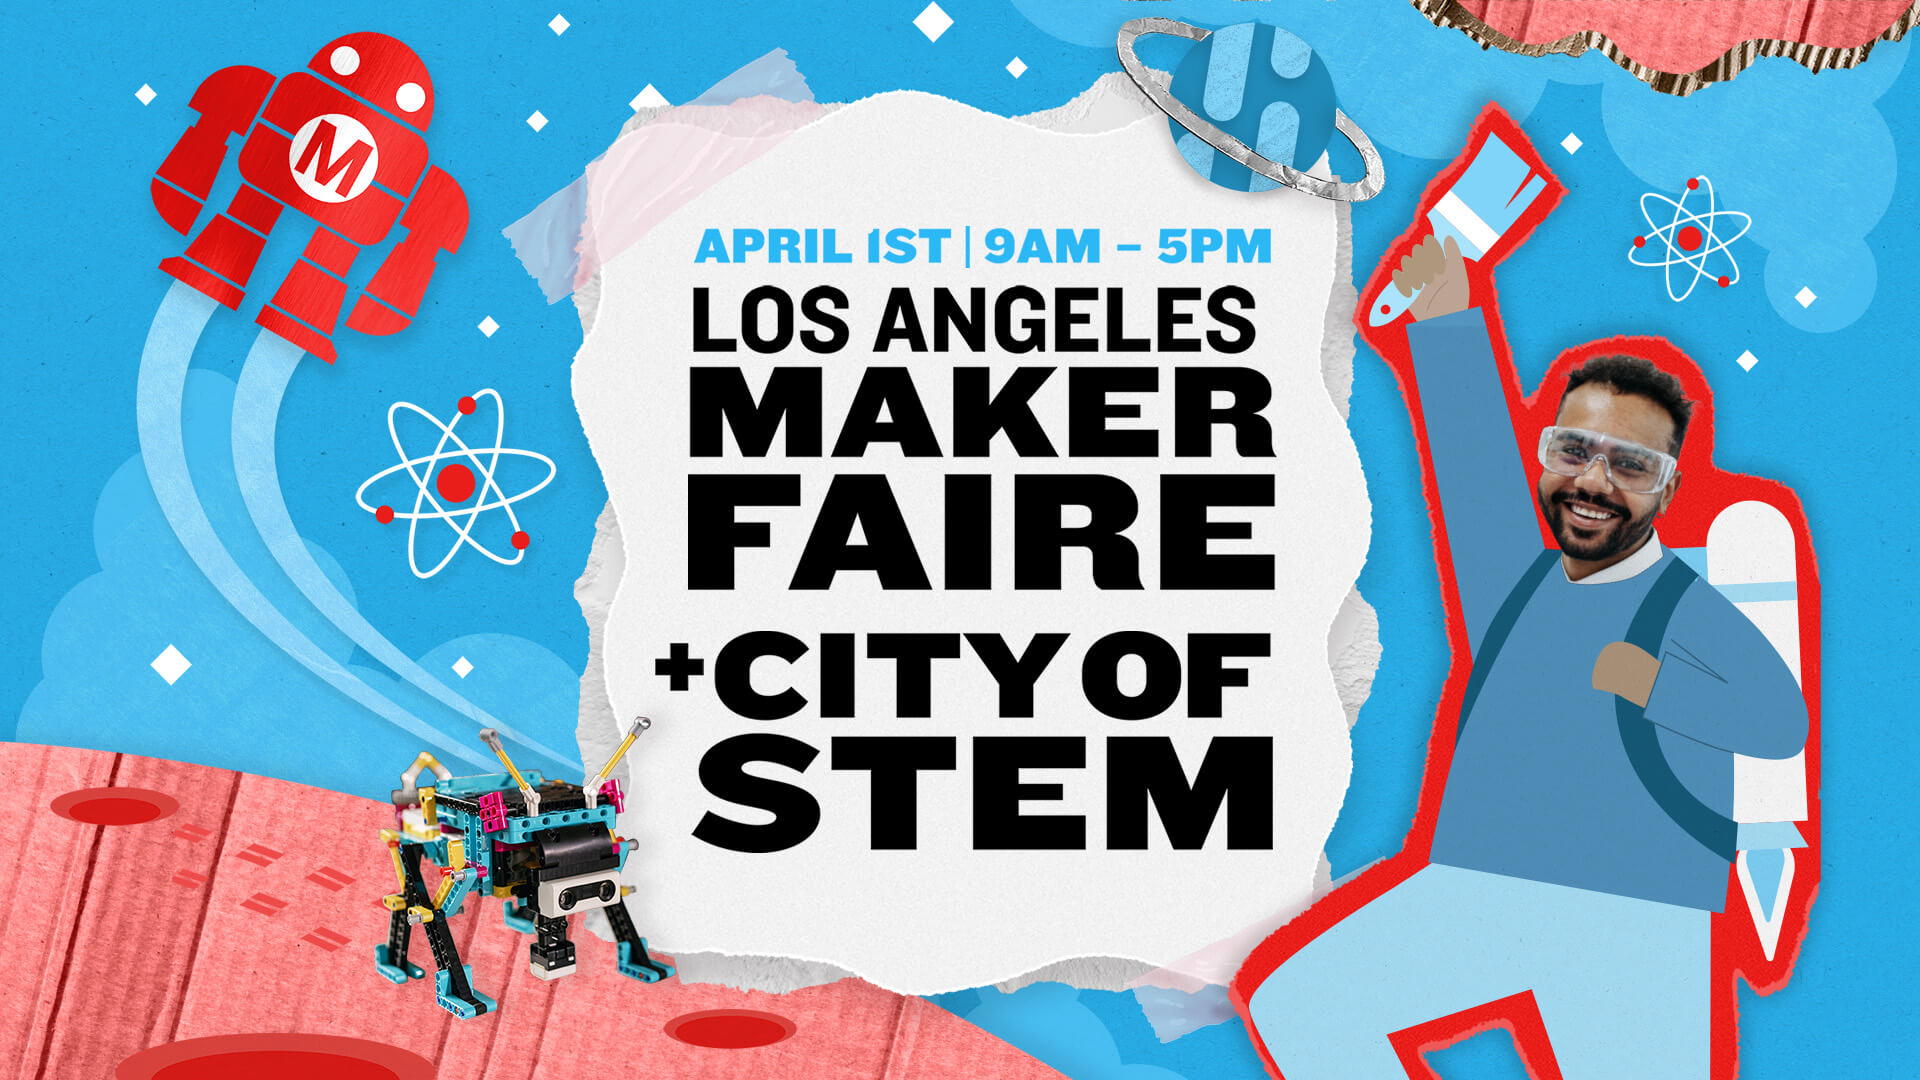 Featured image for “Volunteers Needed: Friends & Neighbors Day with Viterbi at the LA Maker Faire! Saturday, April 1st”